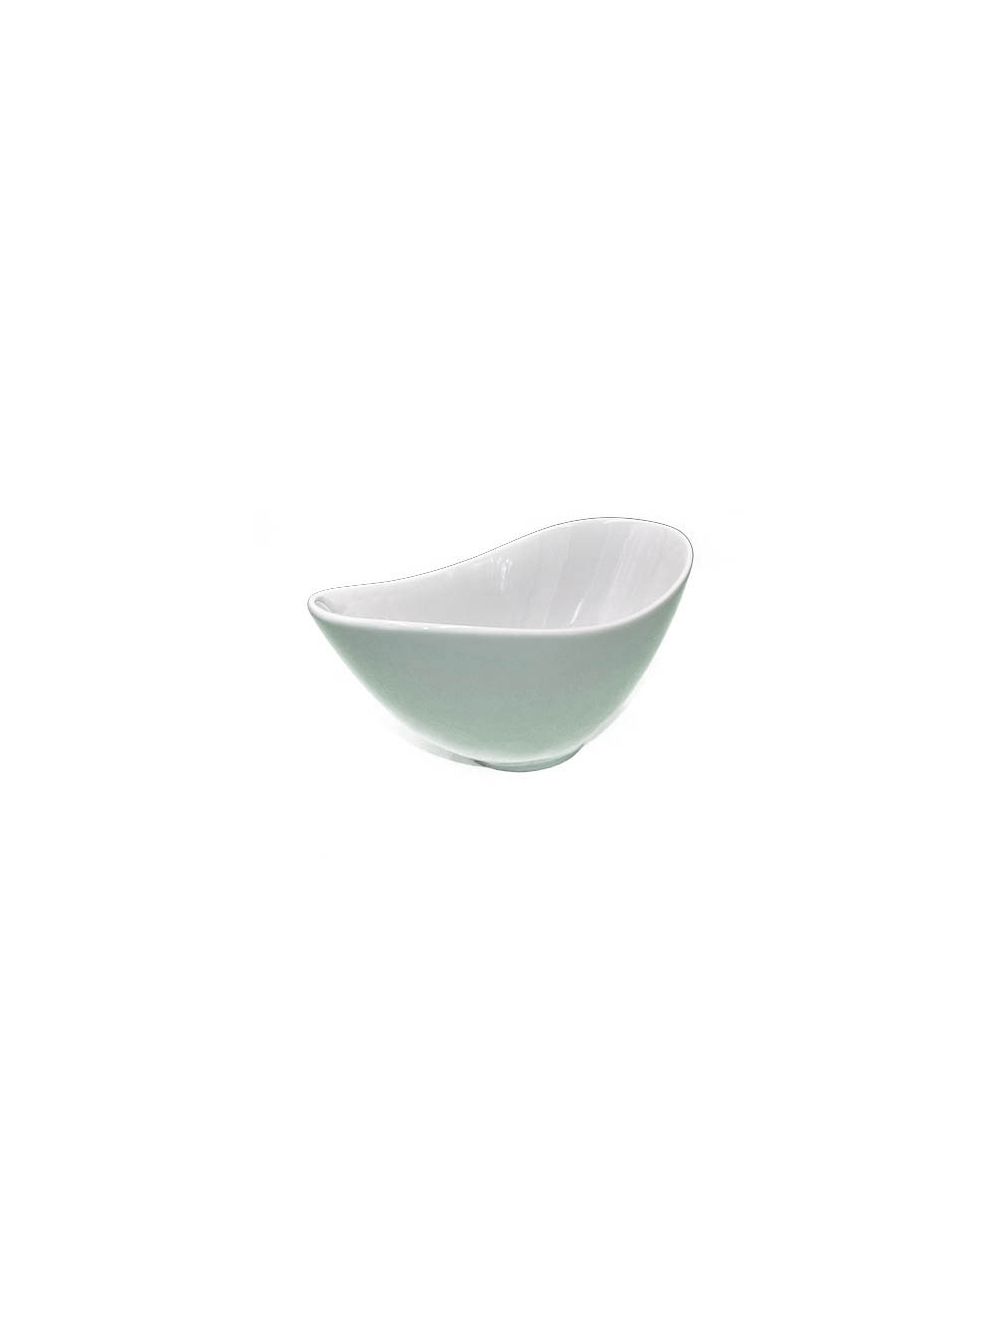 Gala Dolomite Footed Bowl 12Inch